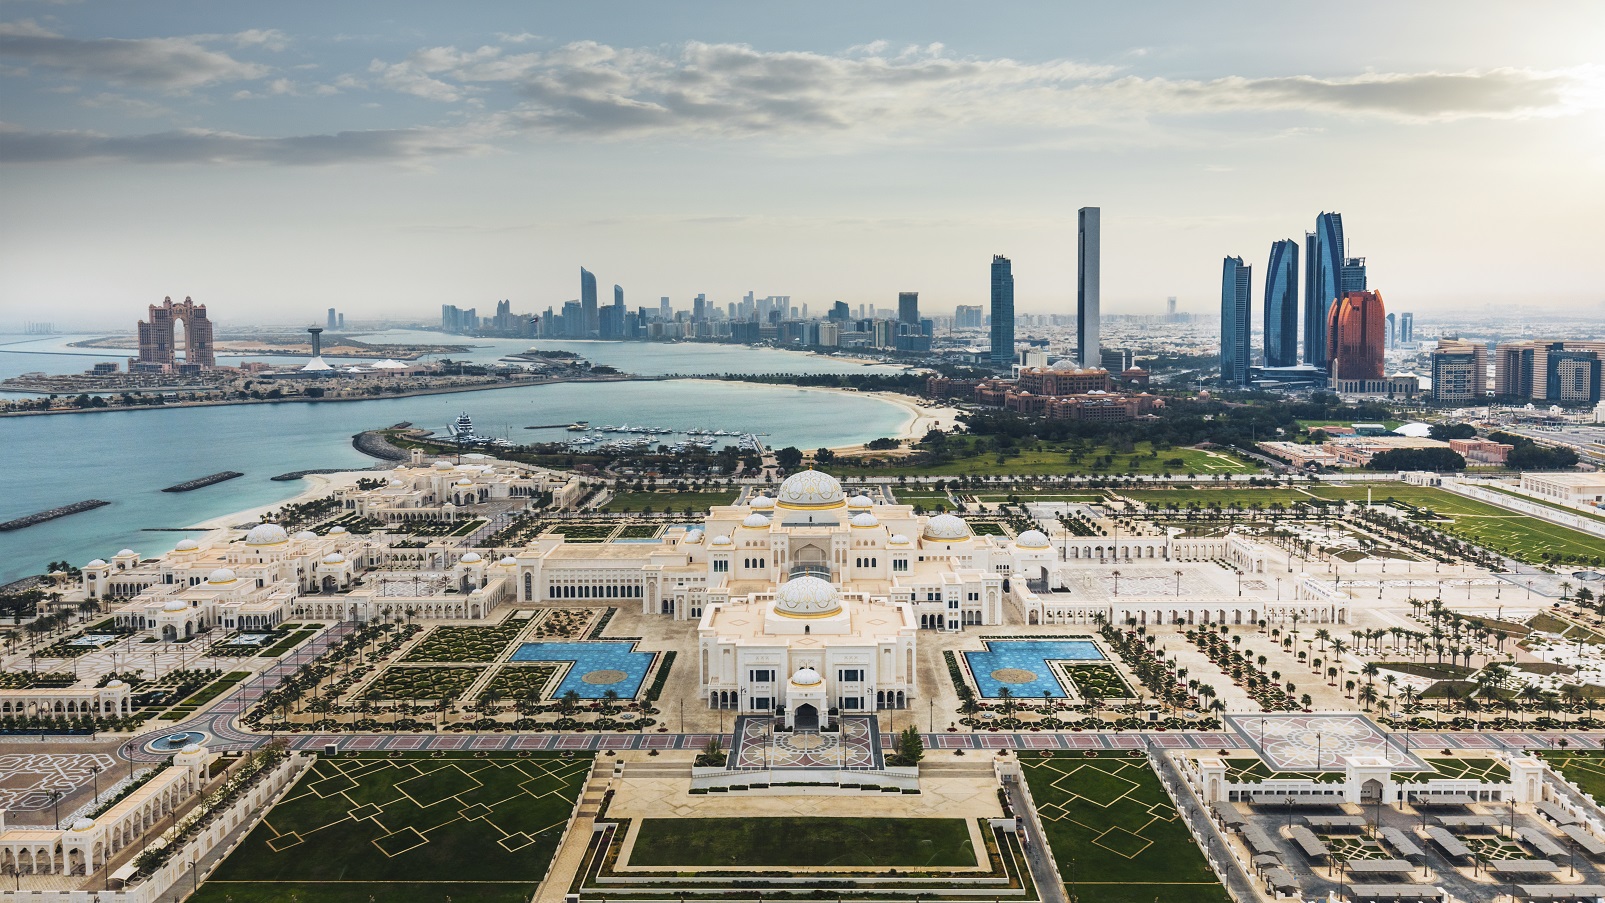 The Department Of Culture And Tourism – Abu Dhabi To Expand Its Travel Industry E-Learning Programme